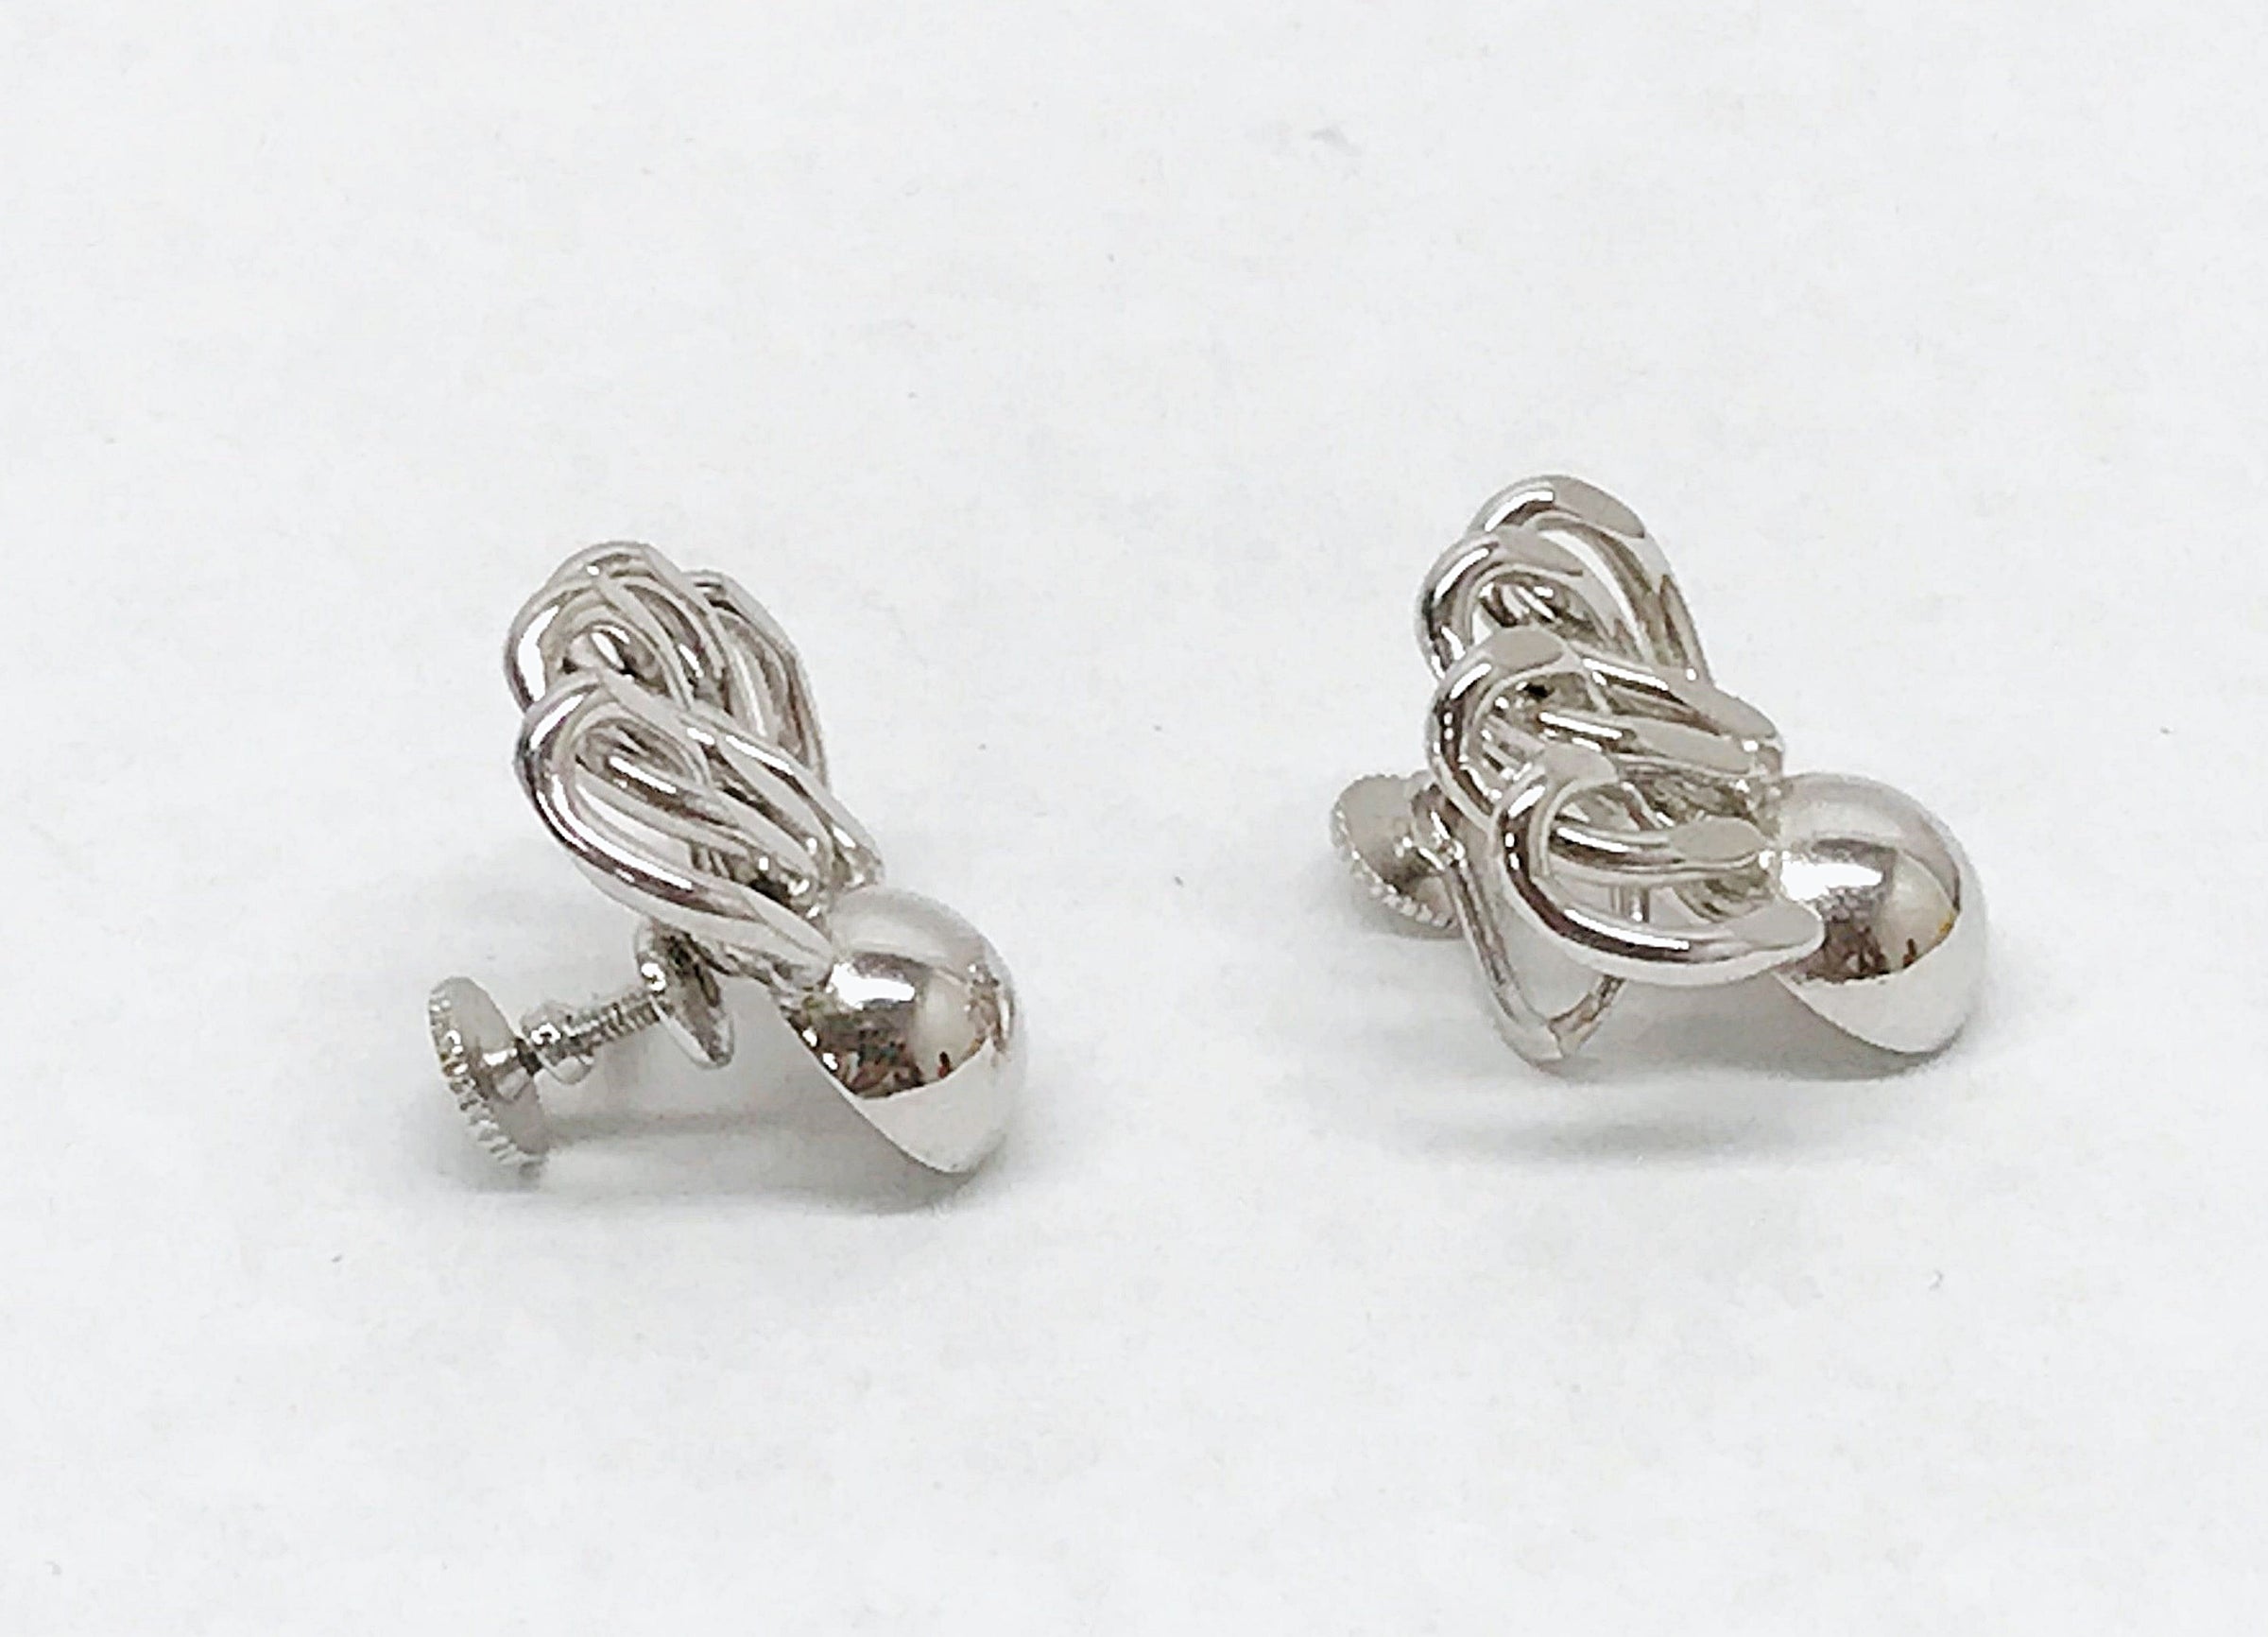 Vintage 1950's Sperry Modernist Silver Tone Screw Back Earrings - Hers and His Treasures